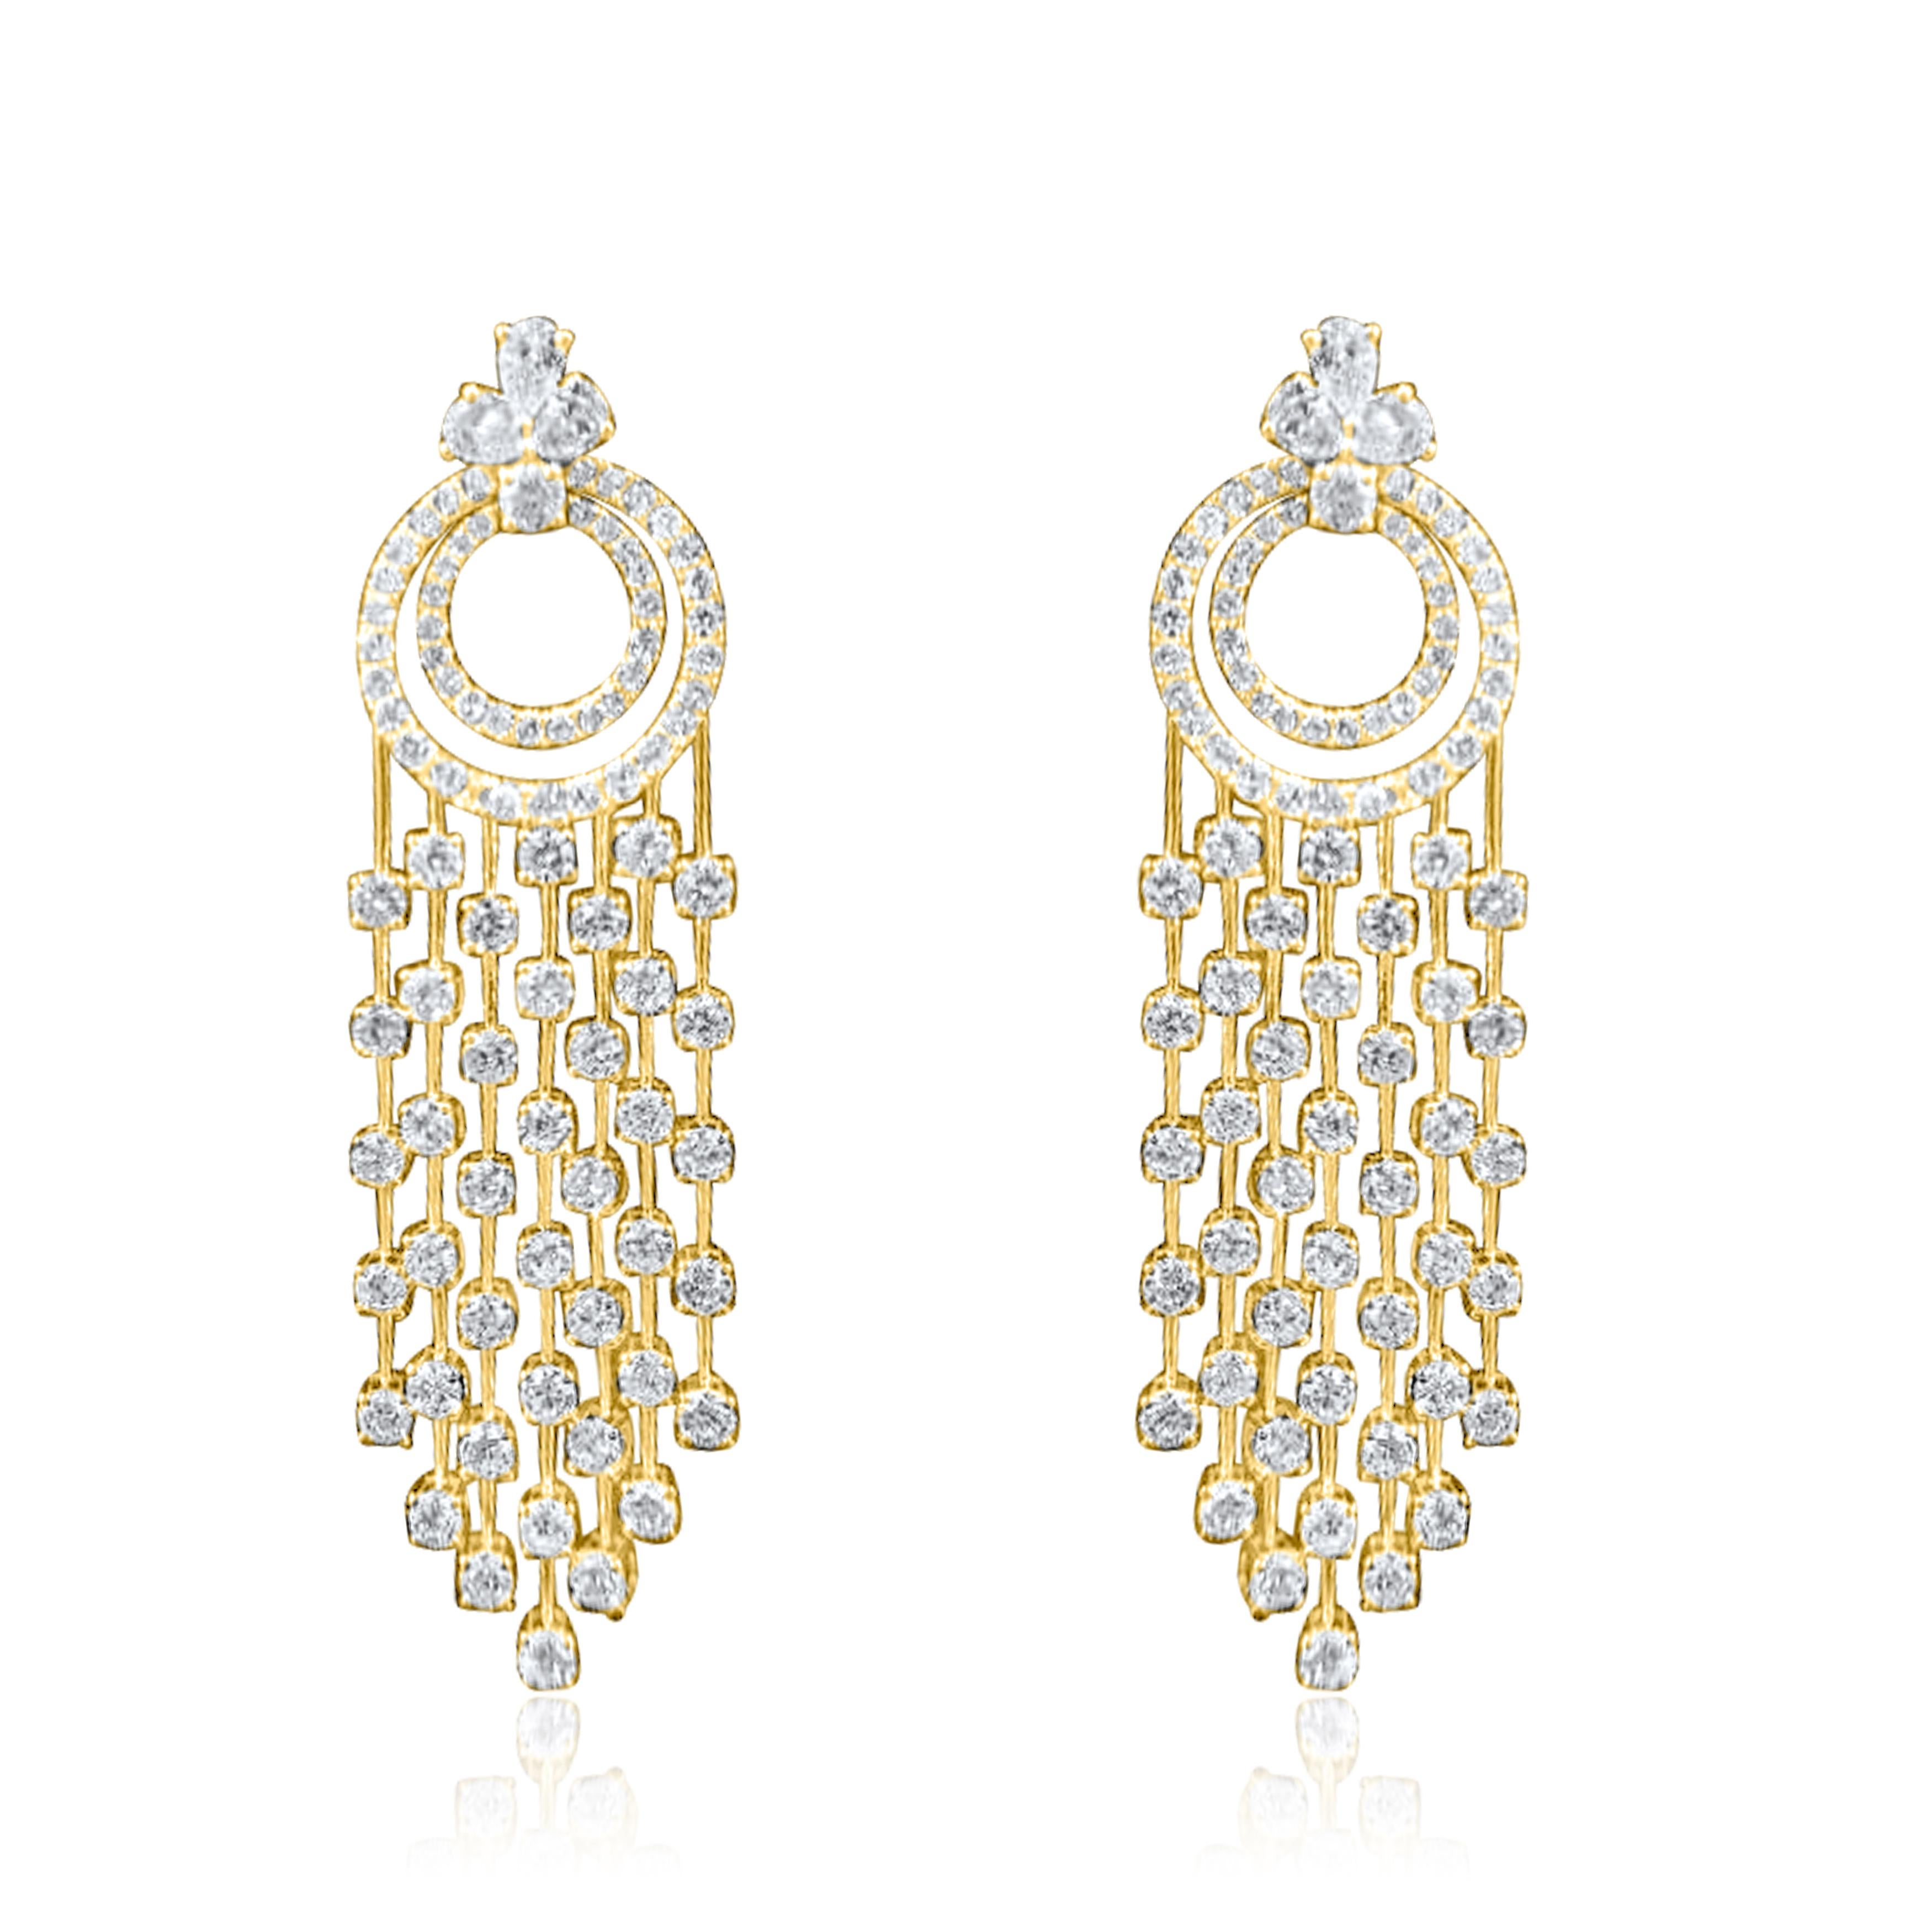 Earring Information
Metal Purity : 18K
Yellow Gold, White Gold, Rose Gold
Gold Weight : 6.8g
Diamonds Carat Weight : 3.0 ttcw
Diamond Color Clarity : F/G Color VS/Si quality
1.39 inches in length x 0.49 inches width
 

Note: Production time for this